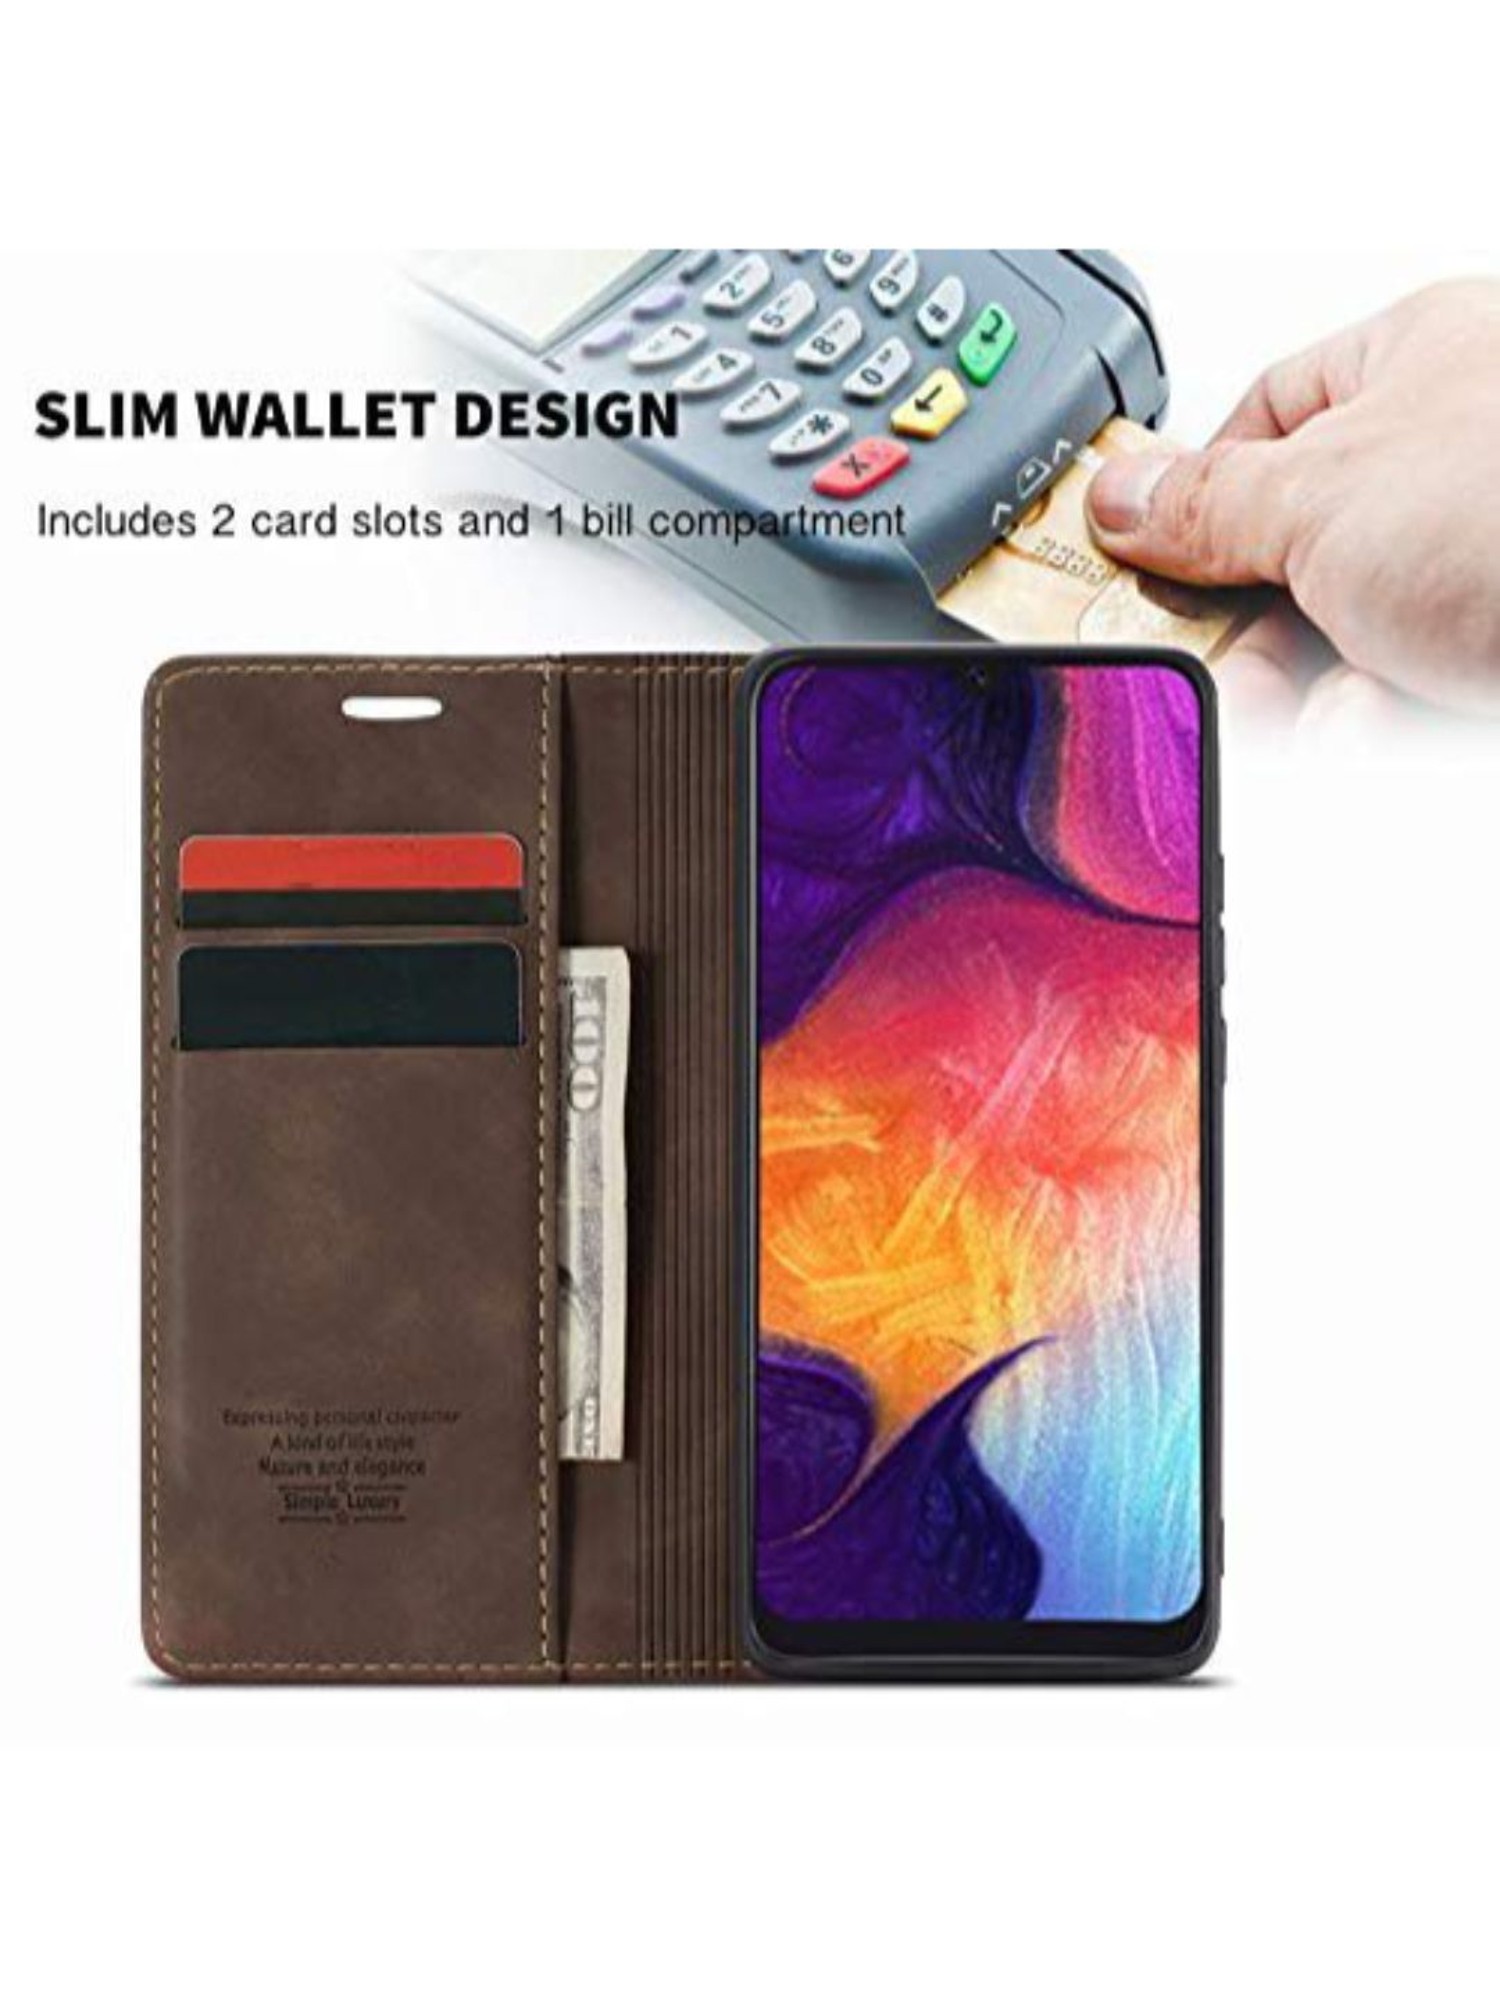 Bear Village Galaxy S10 Case #7 Butterfly 3D Creative Printed PU Leather Magnetic Flip Folio Wallet Cover with Kickstand Function for Samsung Galaxy S10 